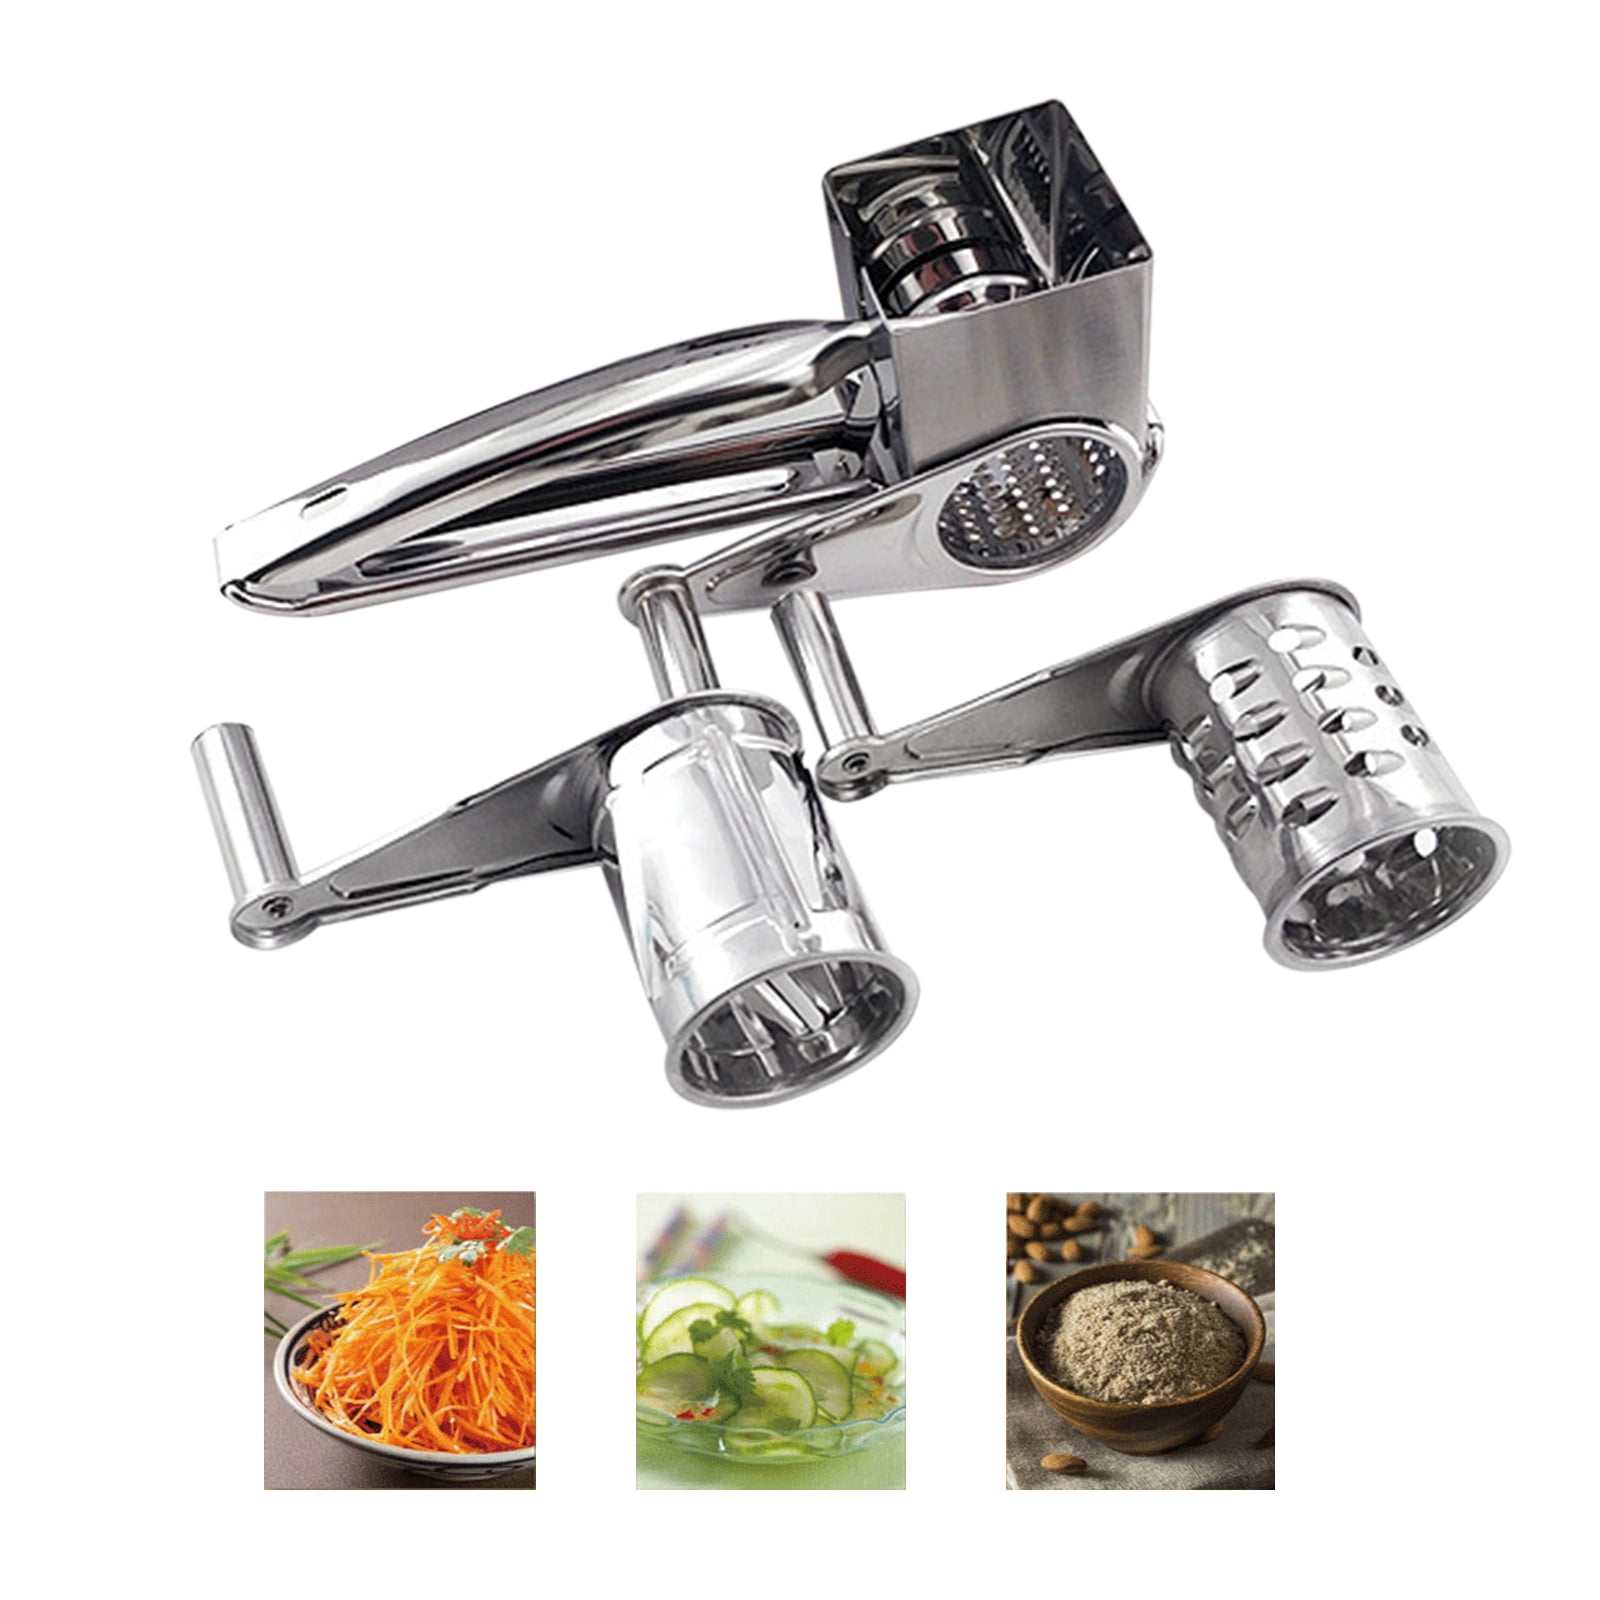 LHS Rotary Cheese Graters for Kitchen, Professional Manual Crank Handheld  Cheese Grater with Stainless Steel Drum for Grating Hard Cheese, Chocolate